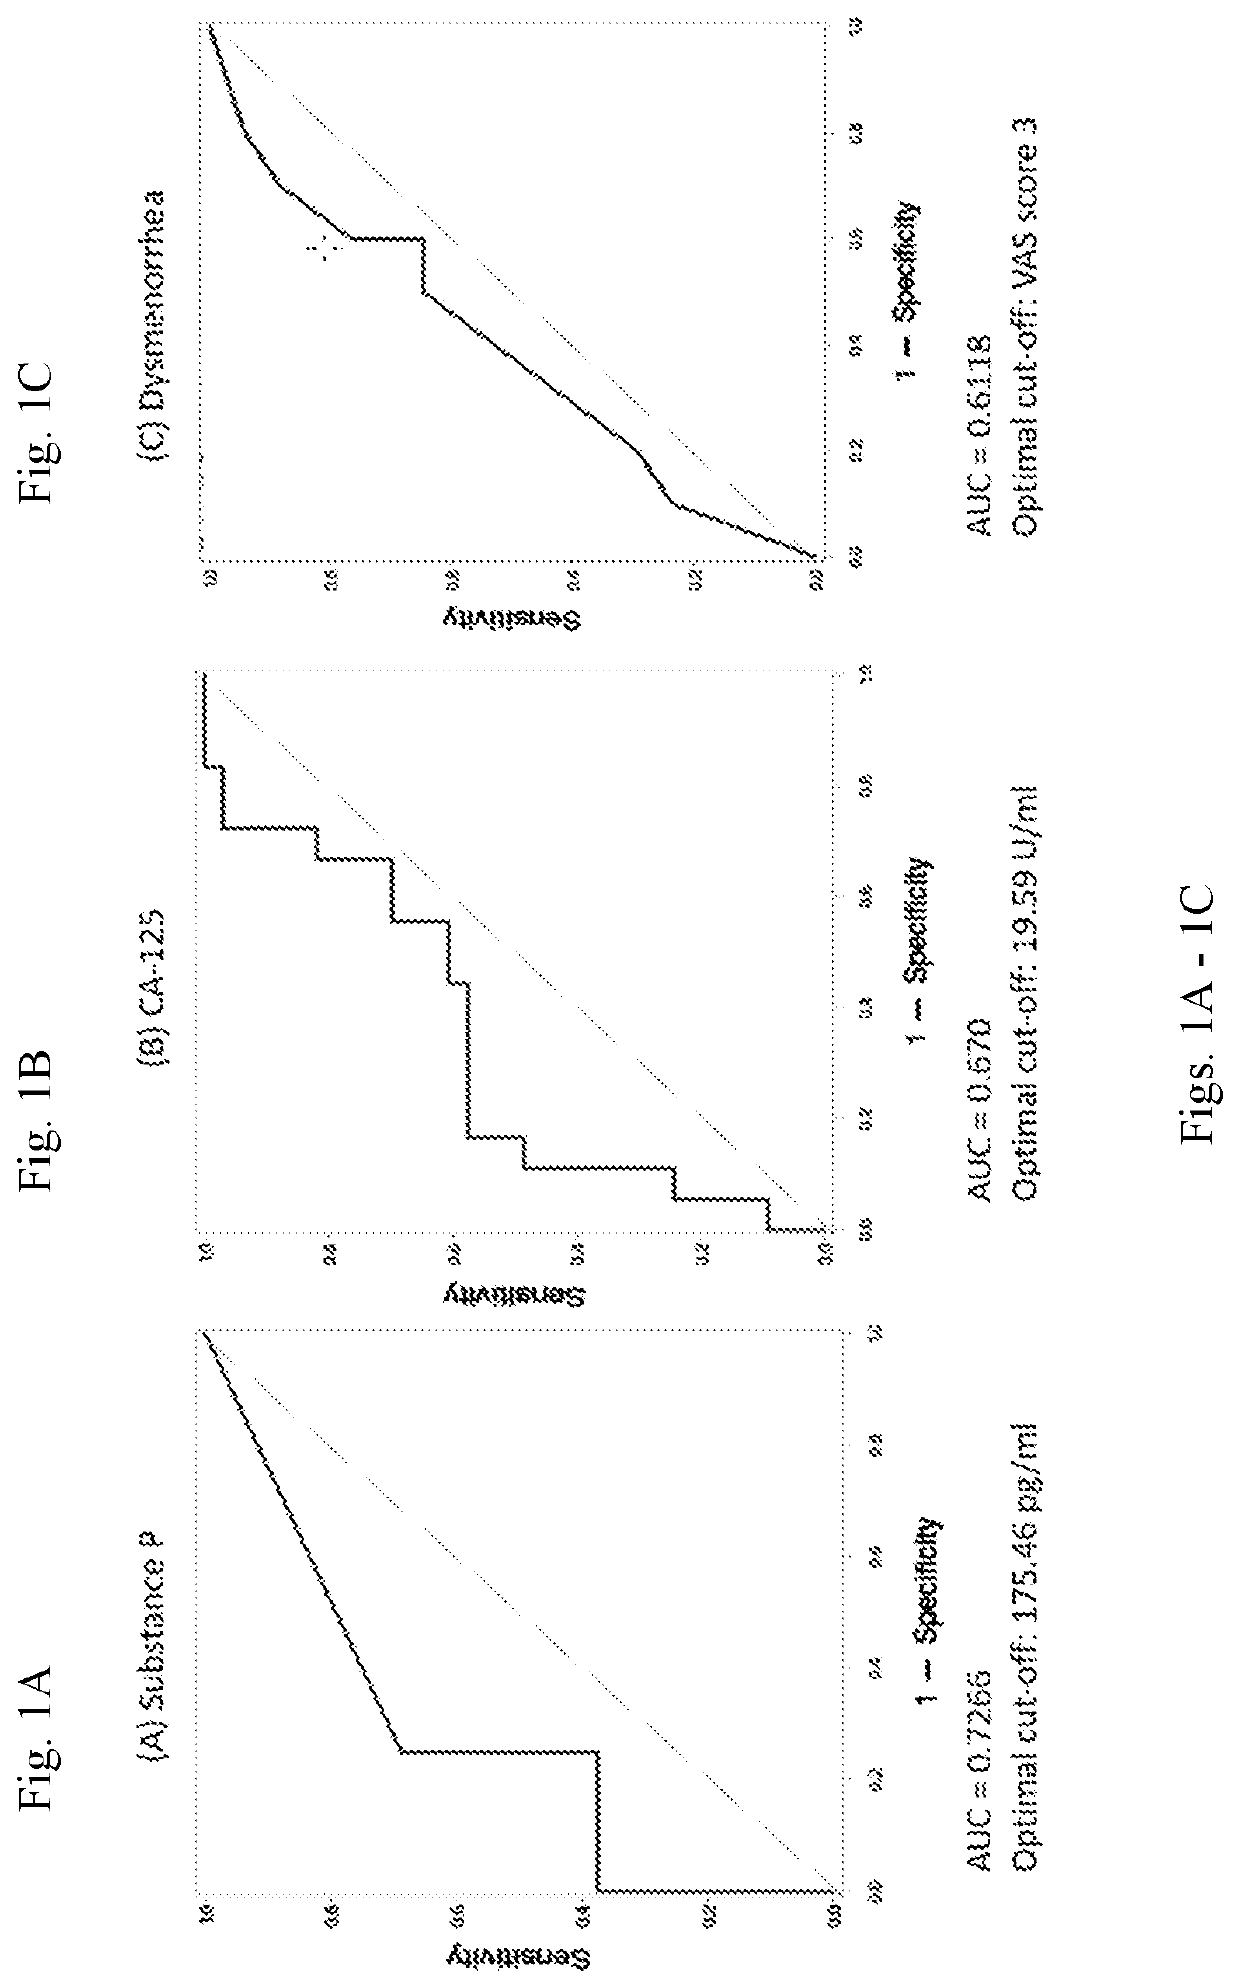 Substance p as blood biomarker for the non-invasive diagnosis of endometriosis